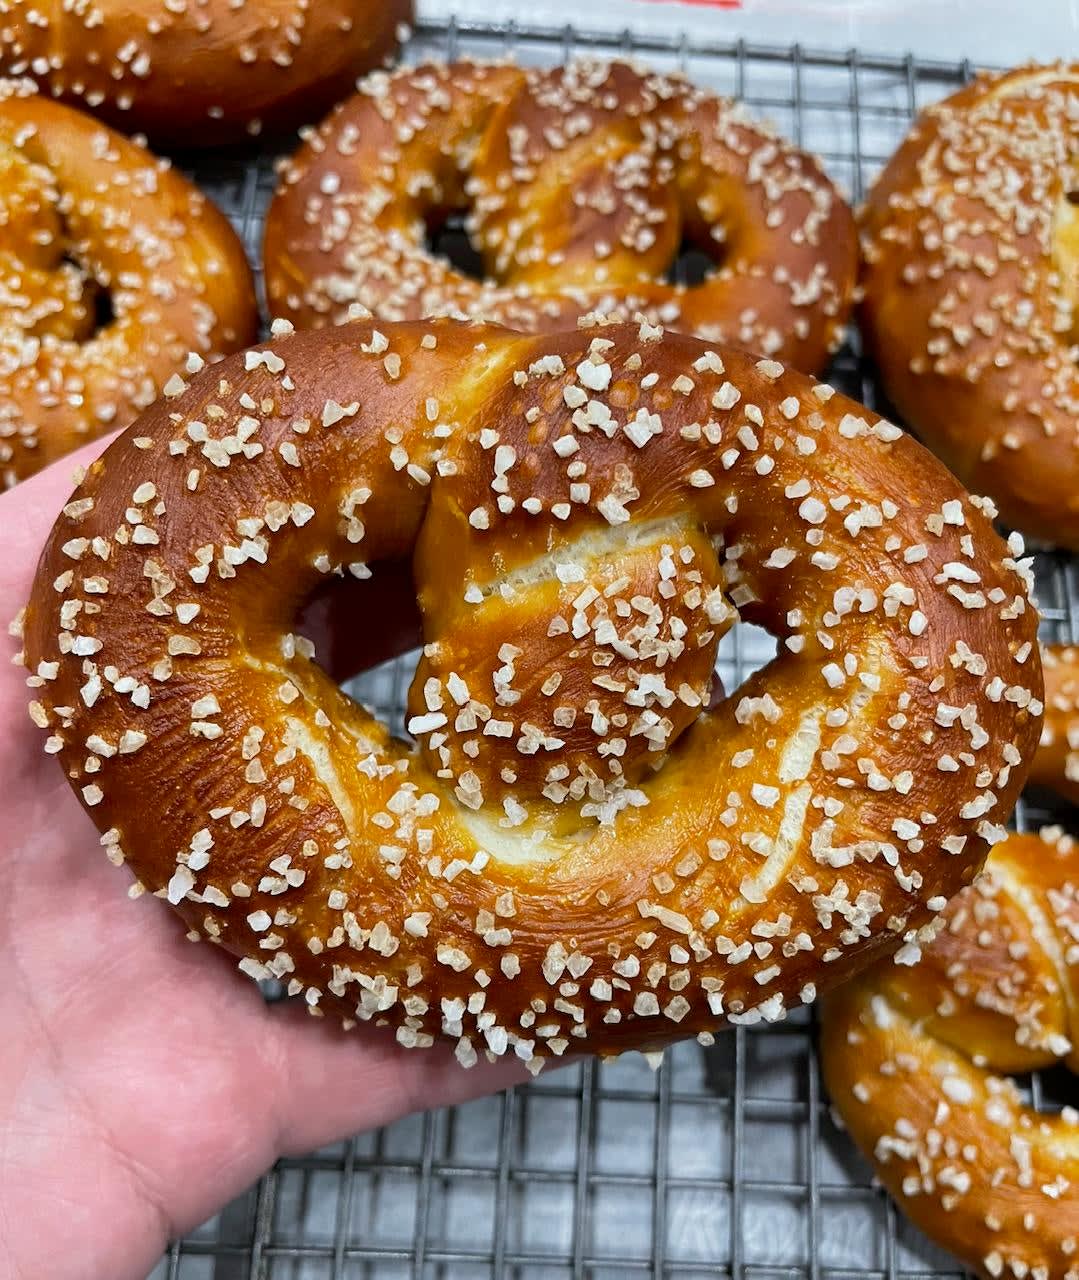 Moved from Philly to Dallas. Can't find any decent soft pretzels down here so I tried my hand at my own. Might have gone a little heavy handed with the salt, but still delicious.